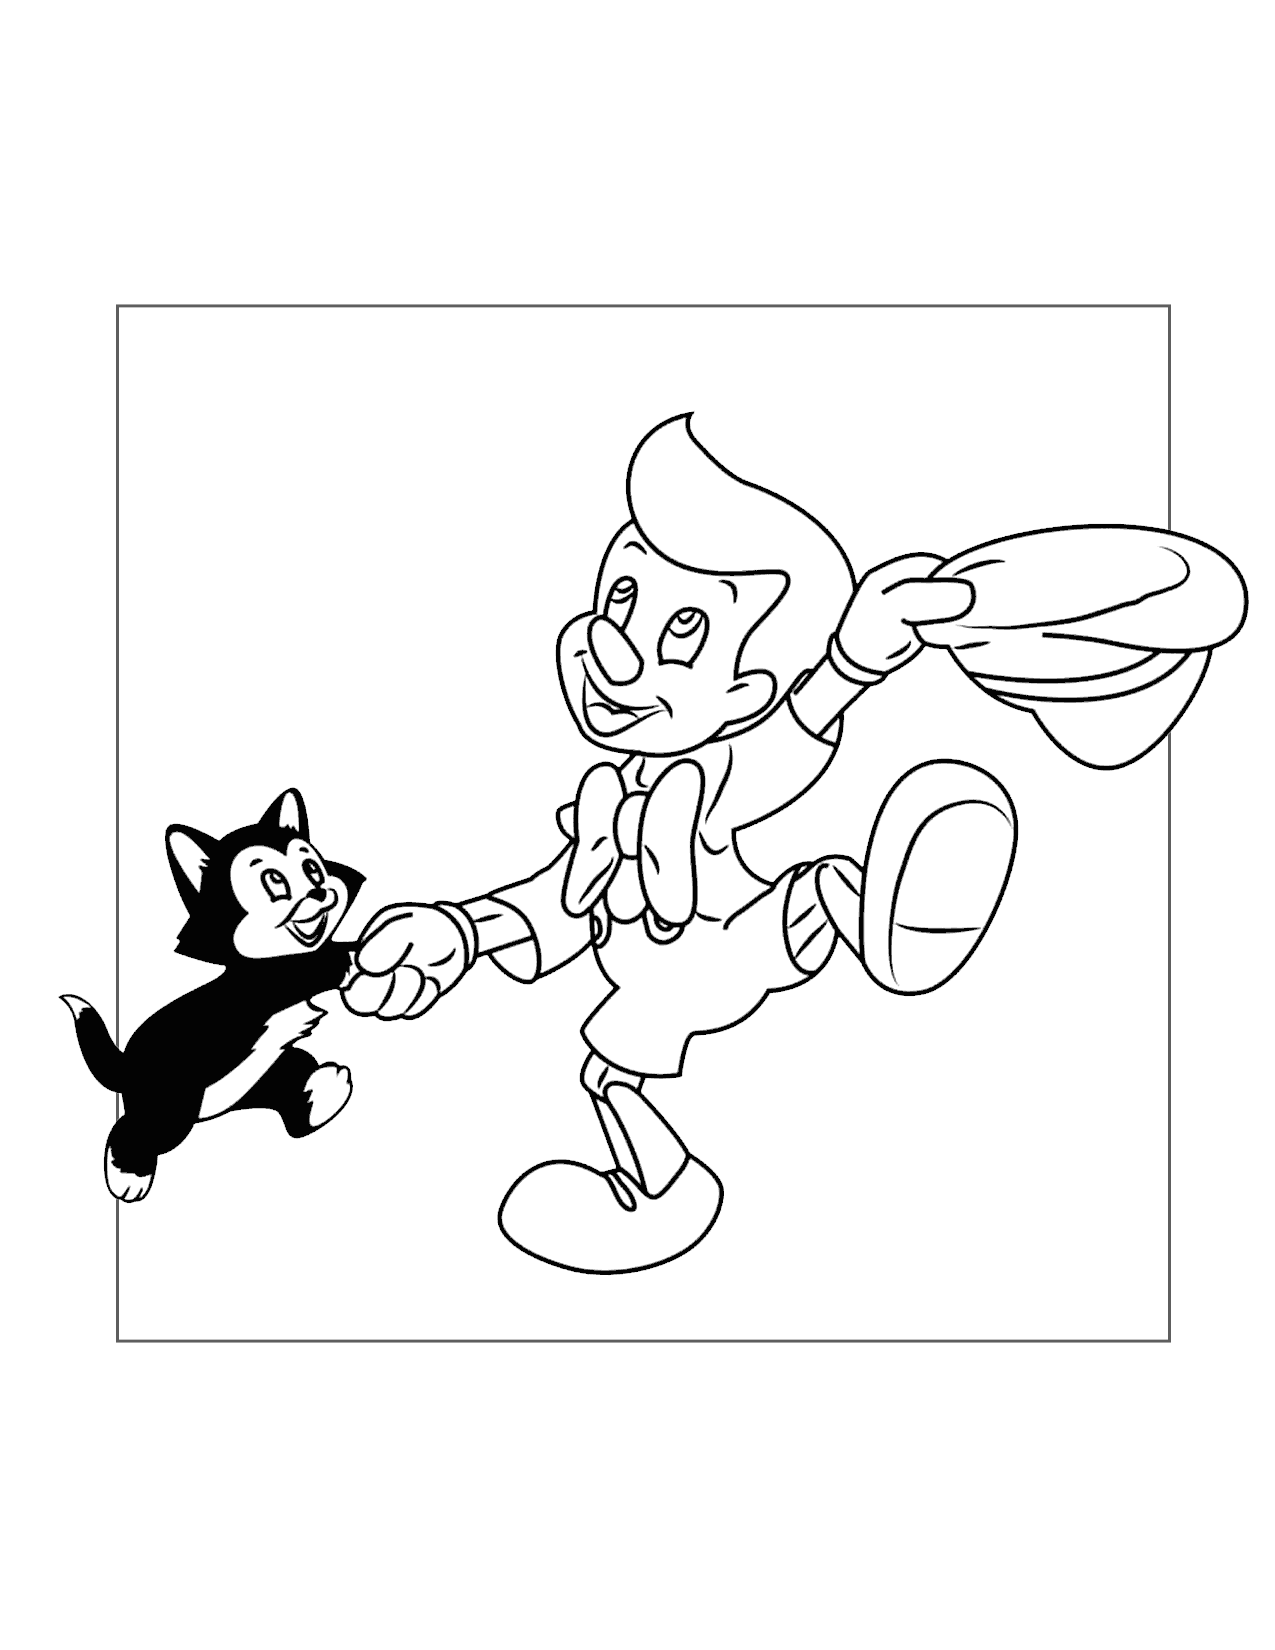 Pinocchio Dances With Figaro Coloring Page